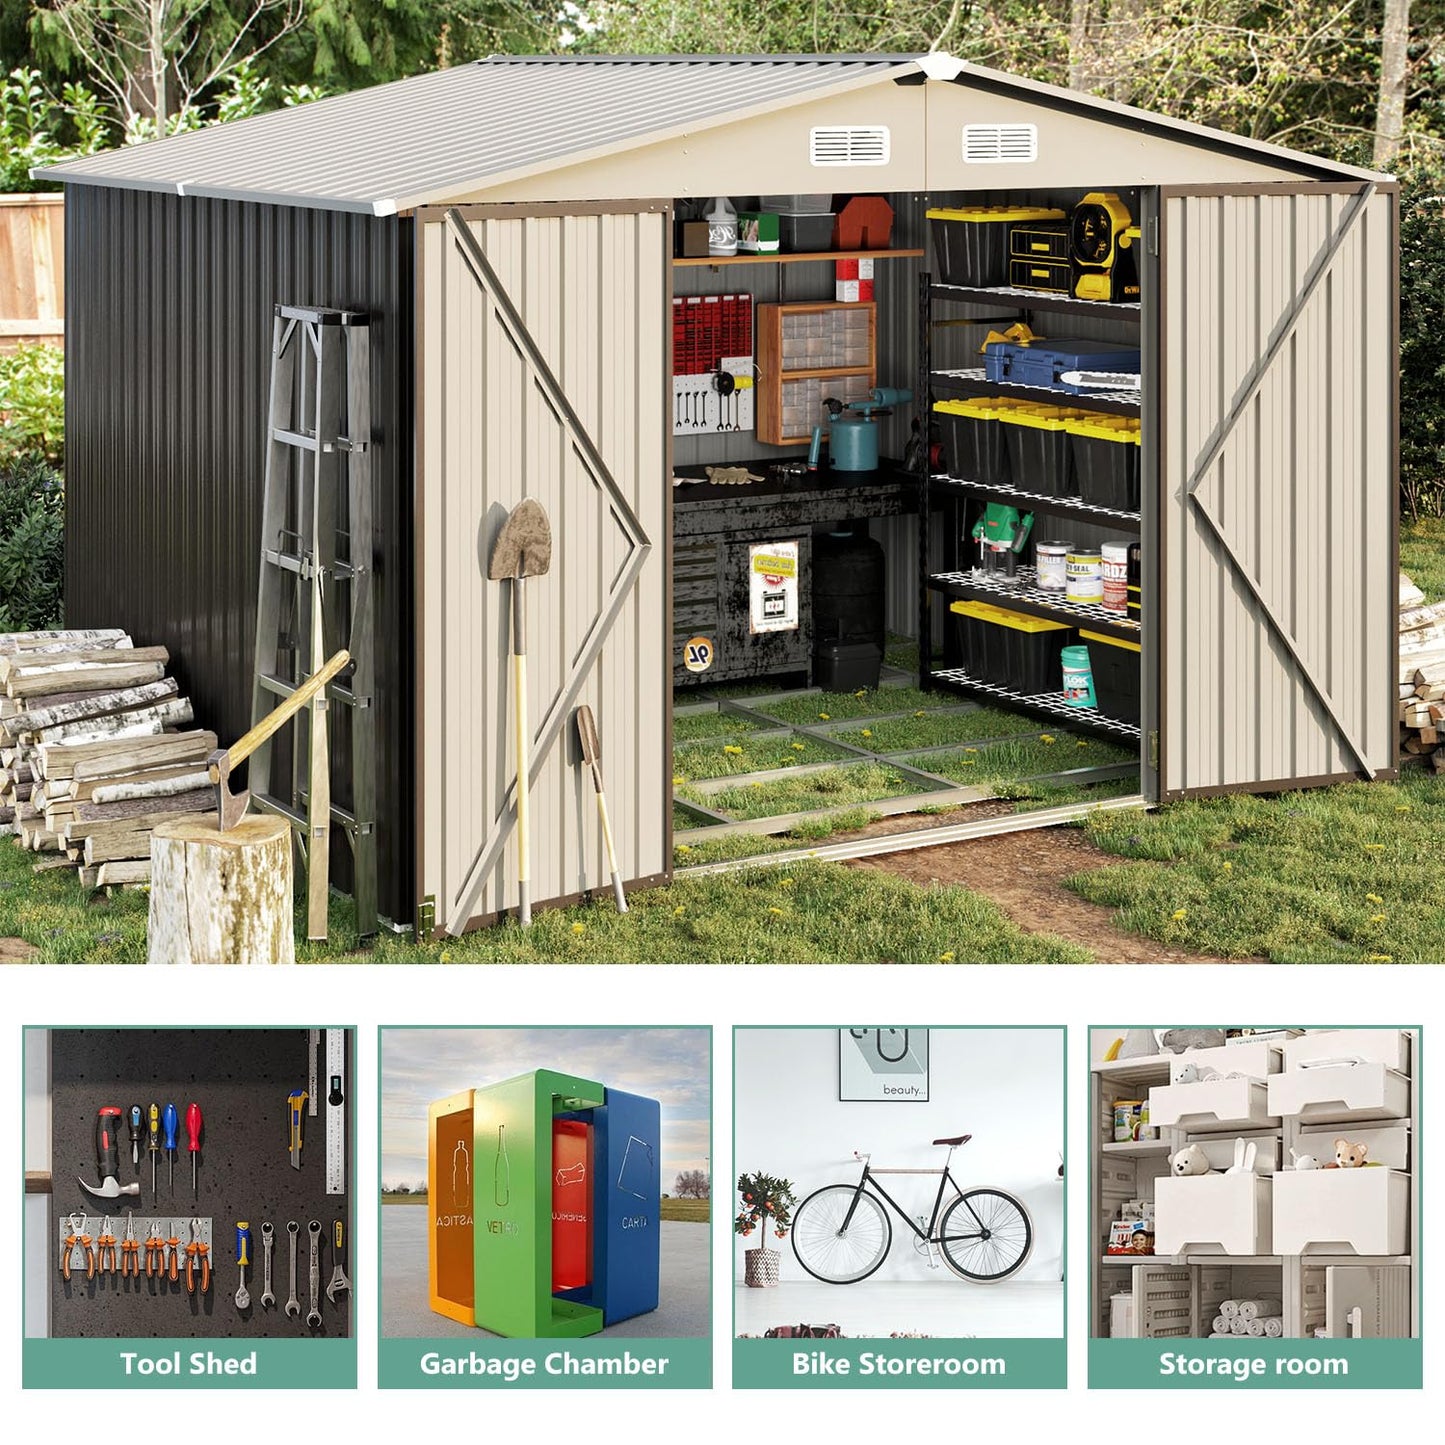 Aoxun 9.6’x7.8’ Outdoor Metal Storage Shed, Steel Utility Tool Shed Storage with Lockable Doors, Metal Sheds Outdoor Storage for Garden, Backyard, Lawn and Patio, Grey